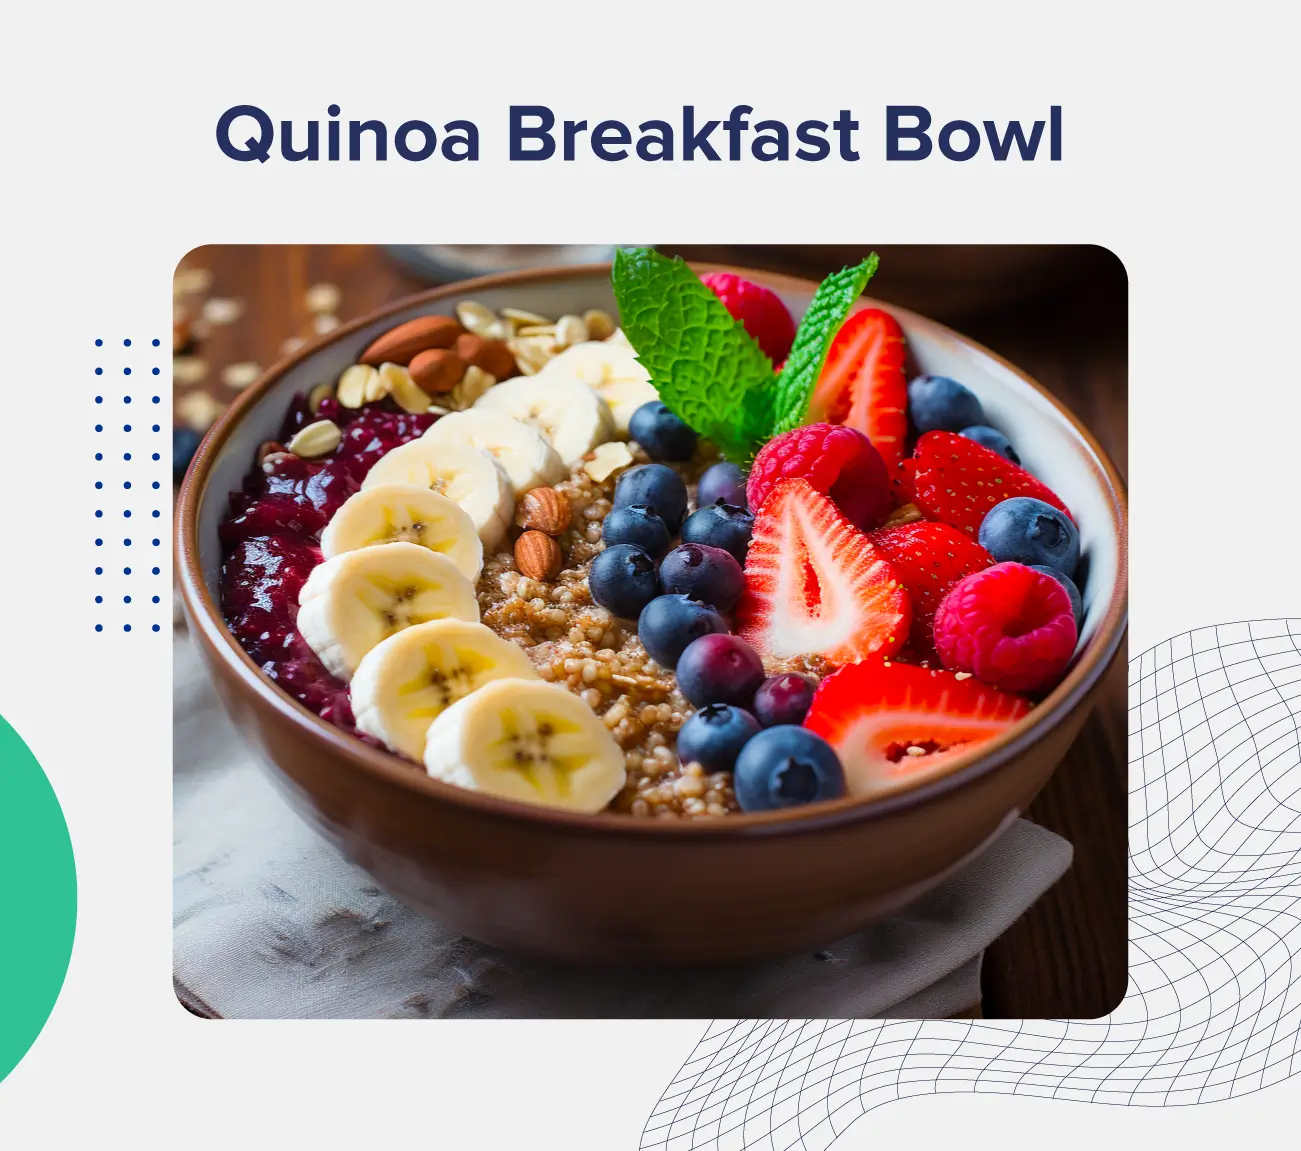 A graphic entitled "Quinoa Breakfast Bowl" depicting a bowl of quinoa adorned with banana slices, almonds, blueberries, strawberries, and more.